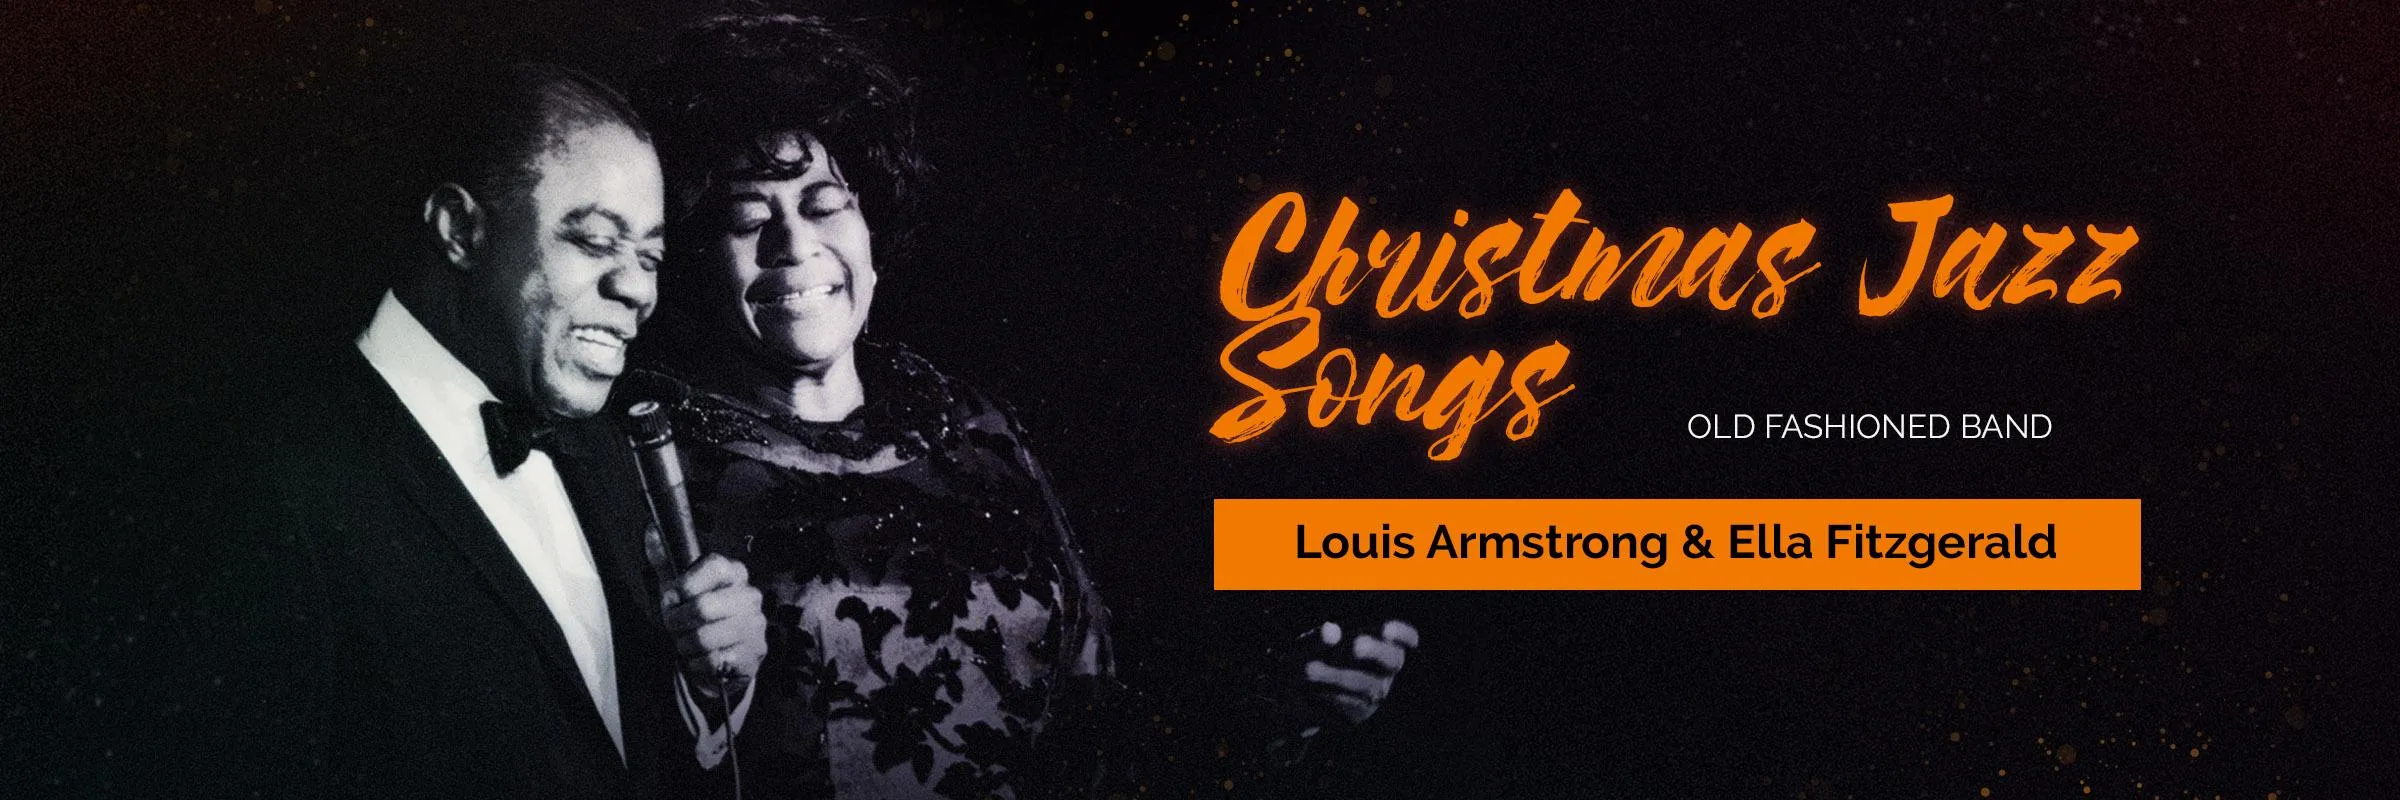 Christmas Jazz Songs – Louis Armstrong, Ella Fitzgerald